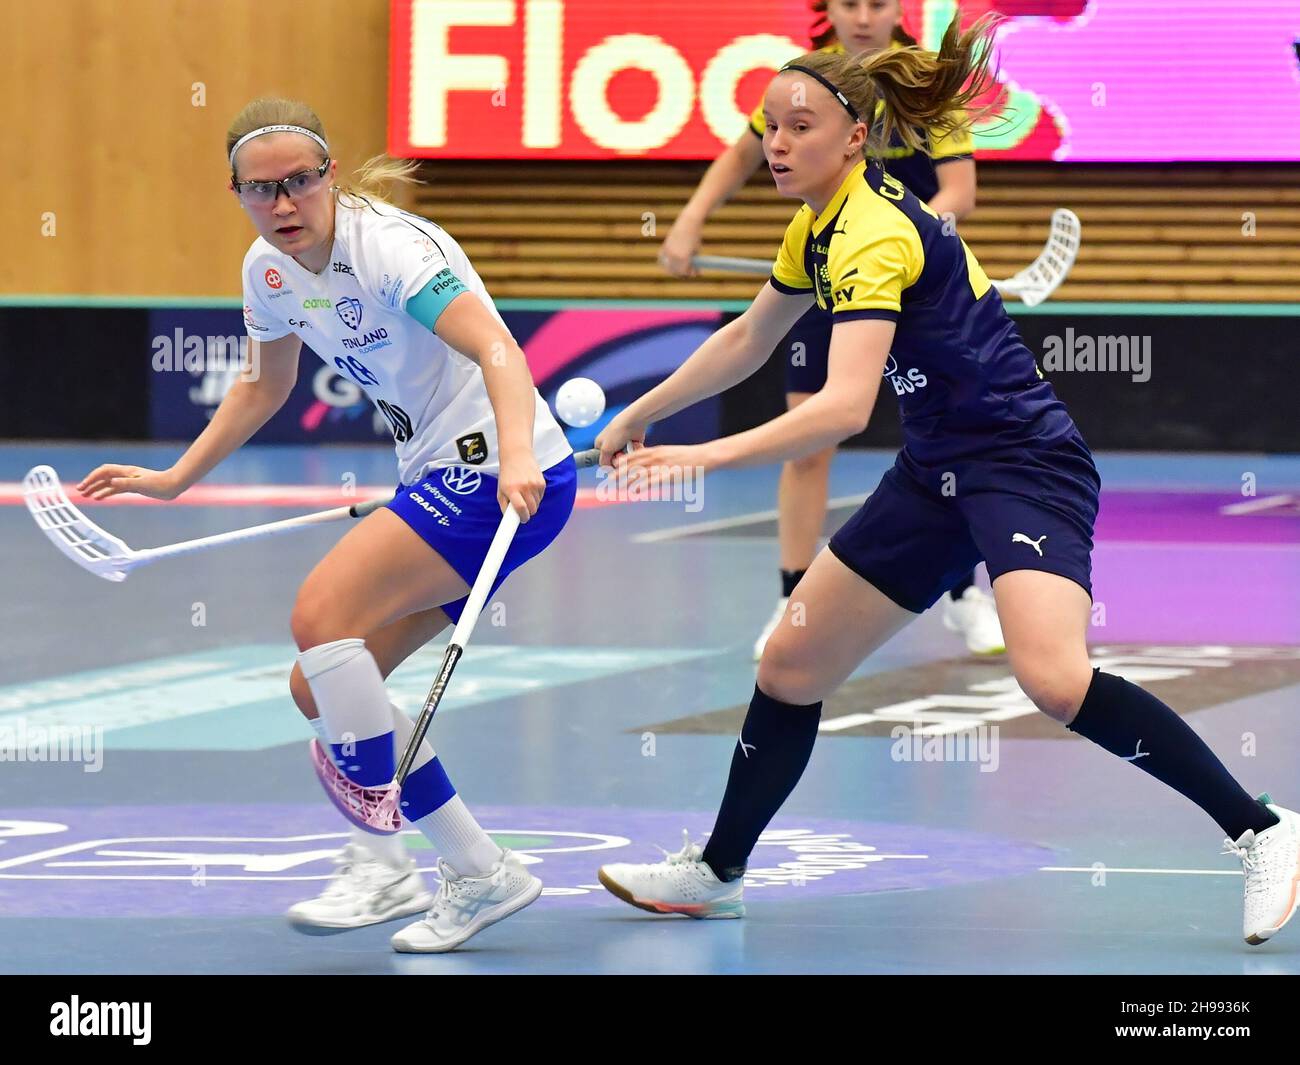 Finland's Veera Kauppi and Sweden's Lisa Carlsson during the final between Finland and Sweden at the Women's World floorball Championships at IFU Aren Stock Photo